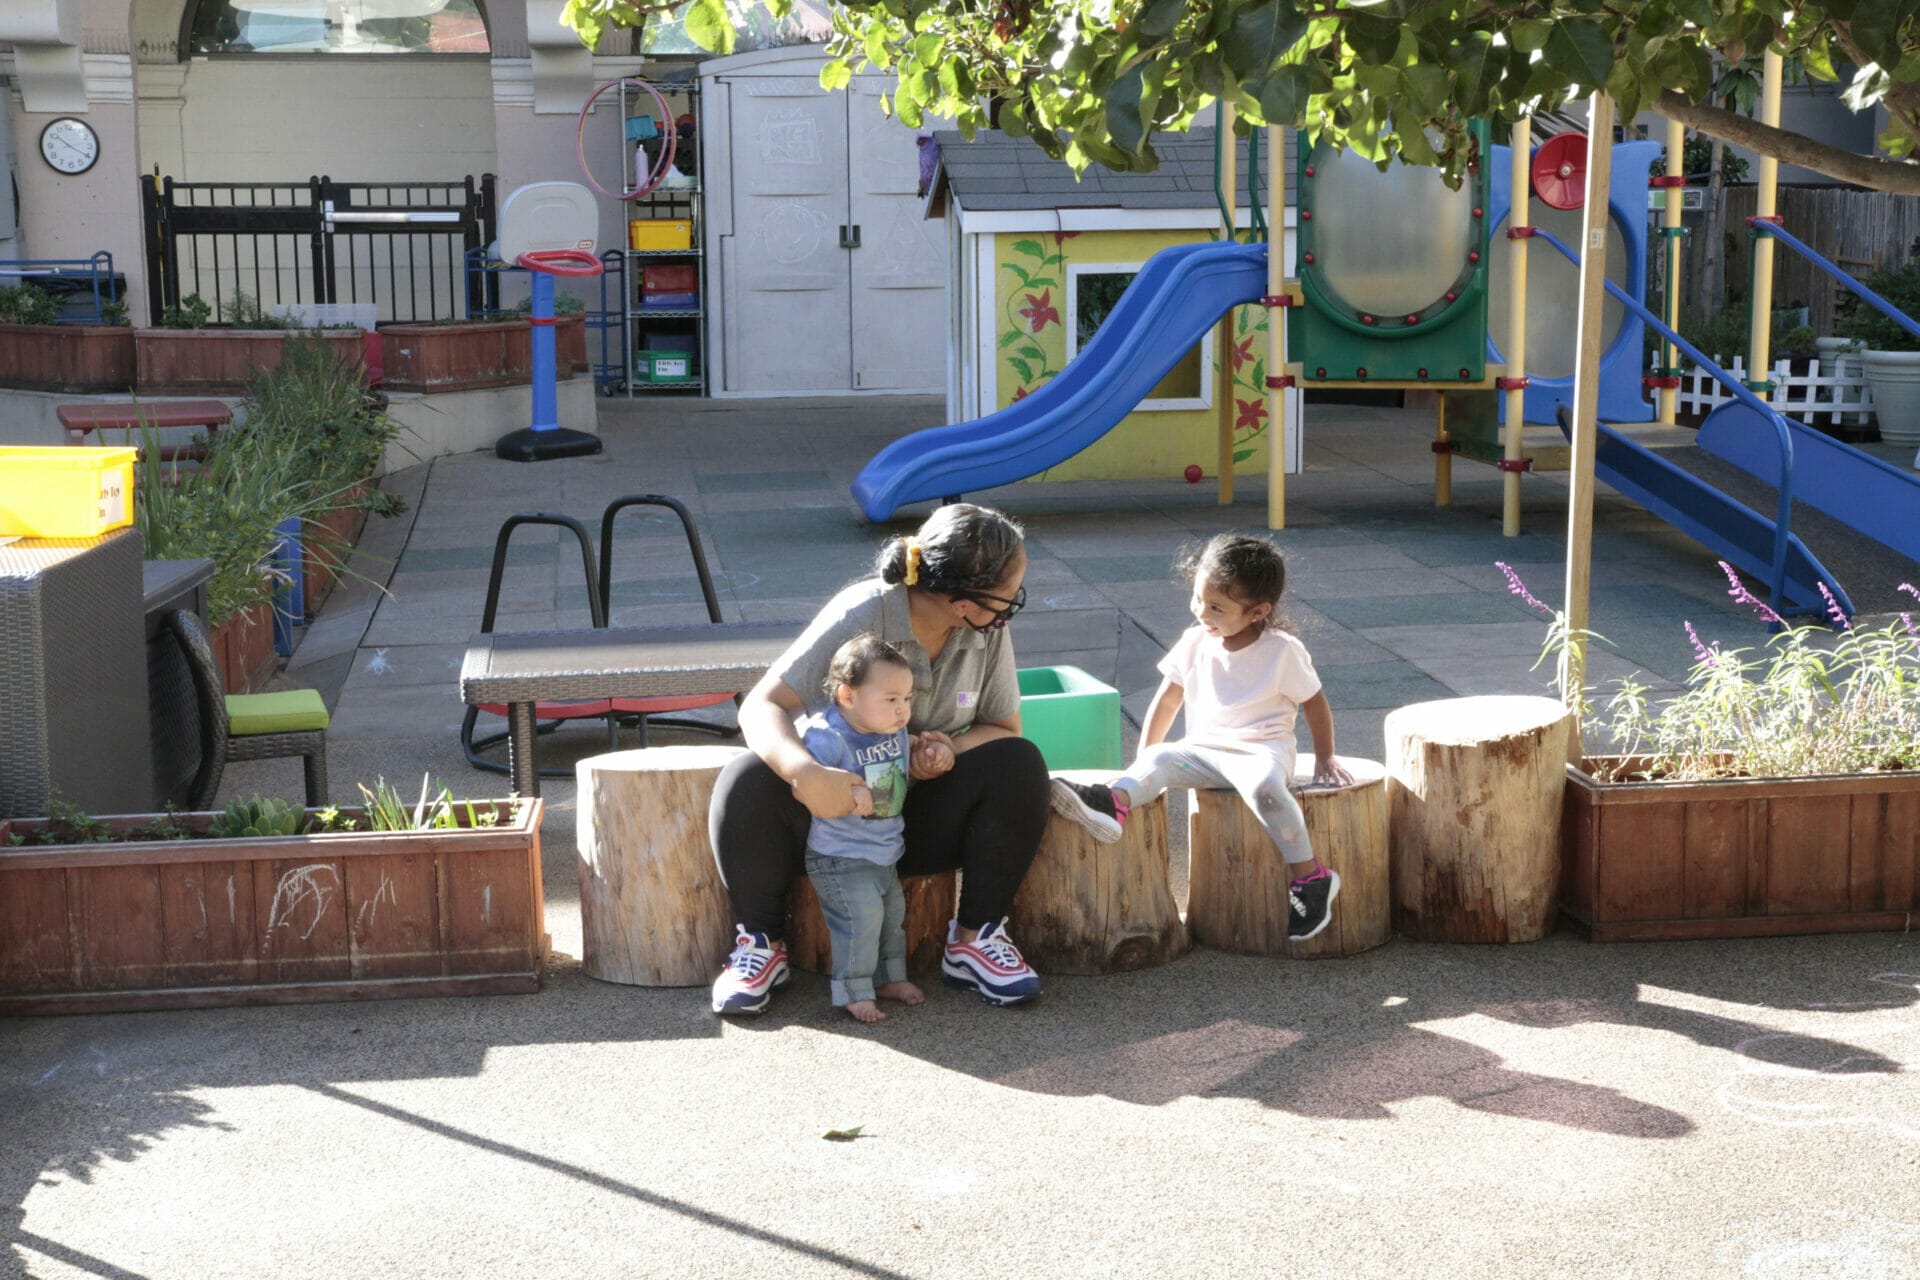 A child educator is sitting outside holding a young child and talking to another child.